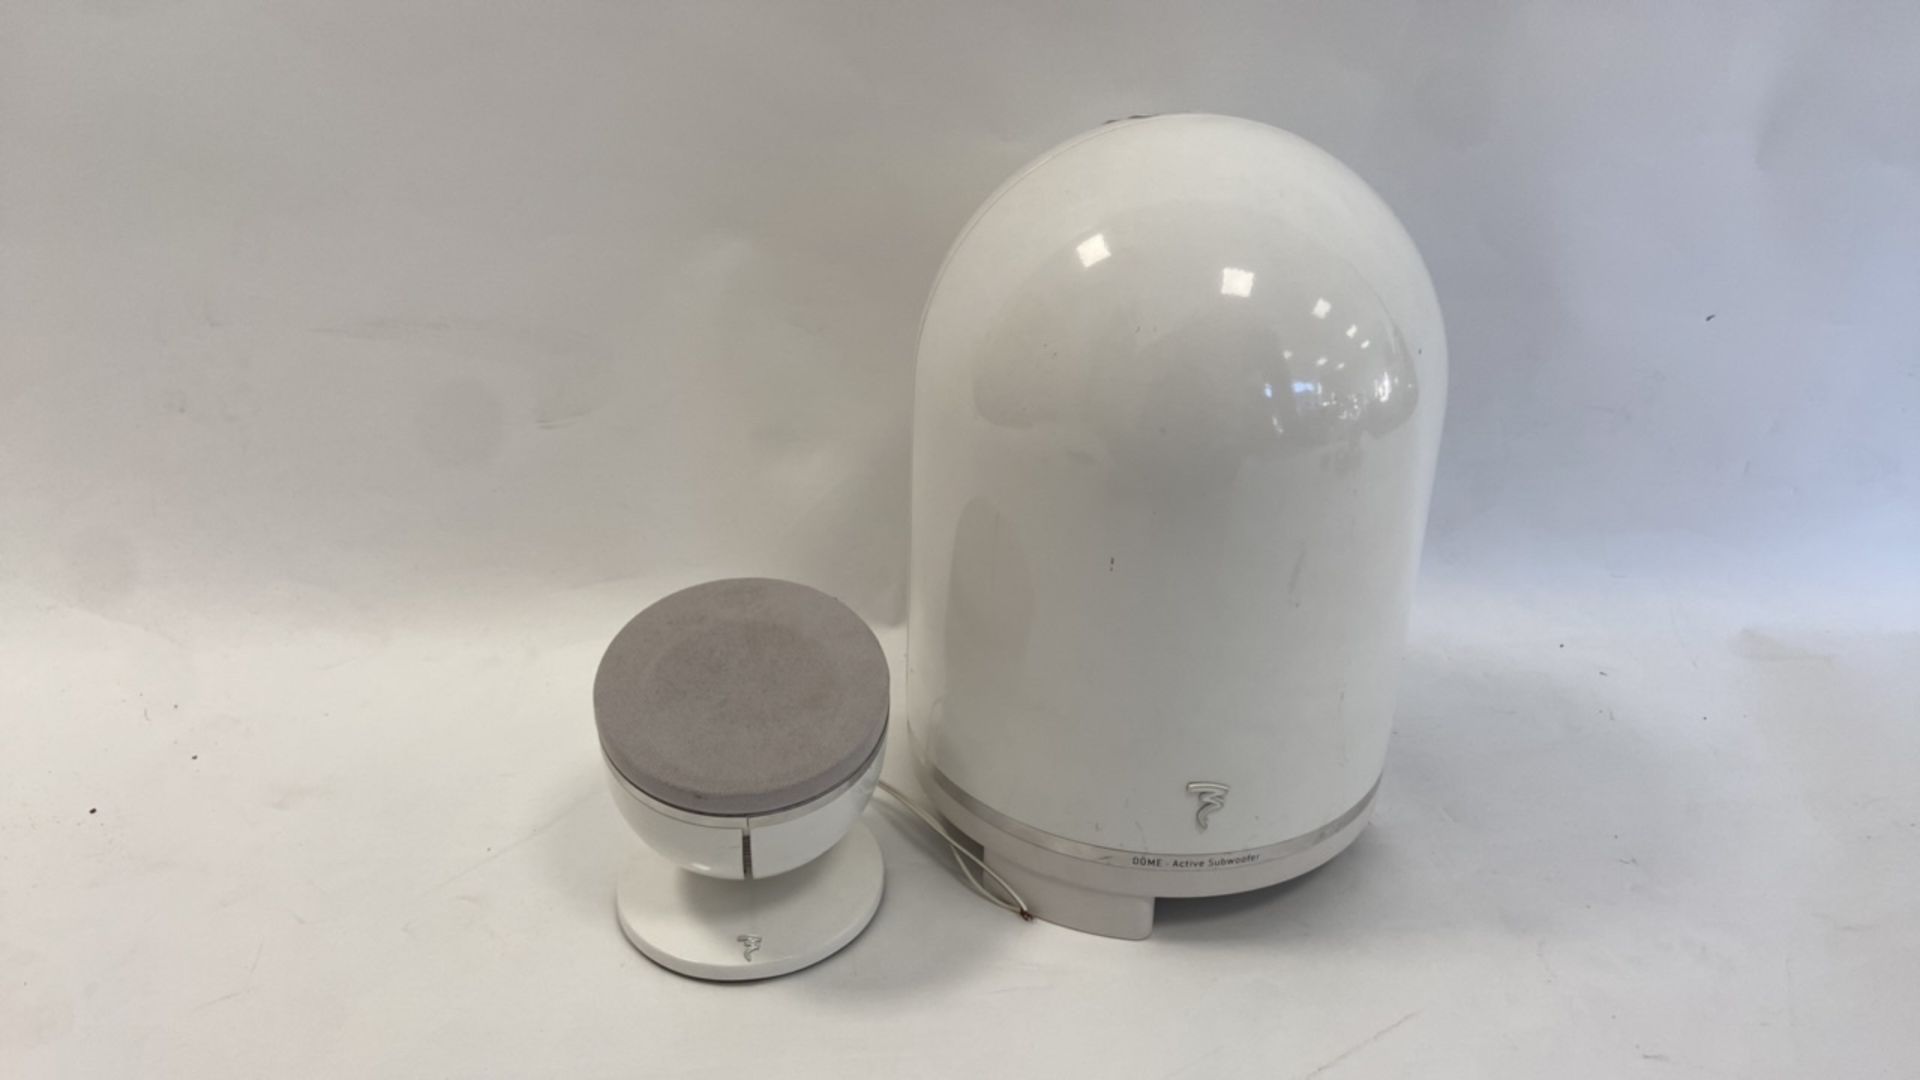 DOME - Active Subwoofer & Compact Speaker